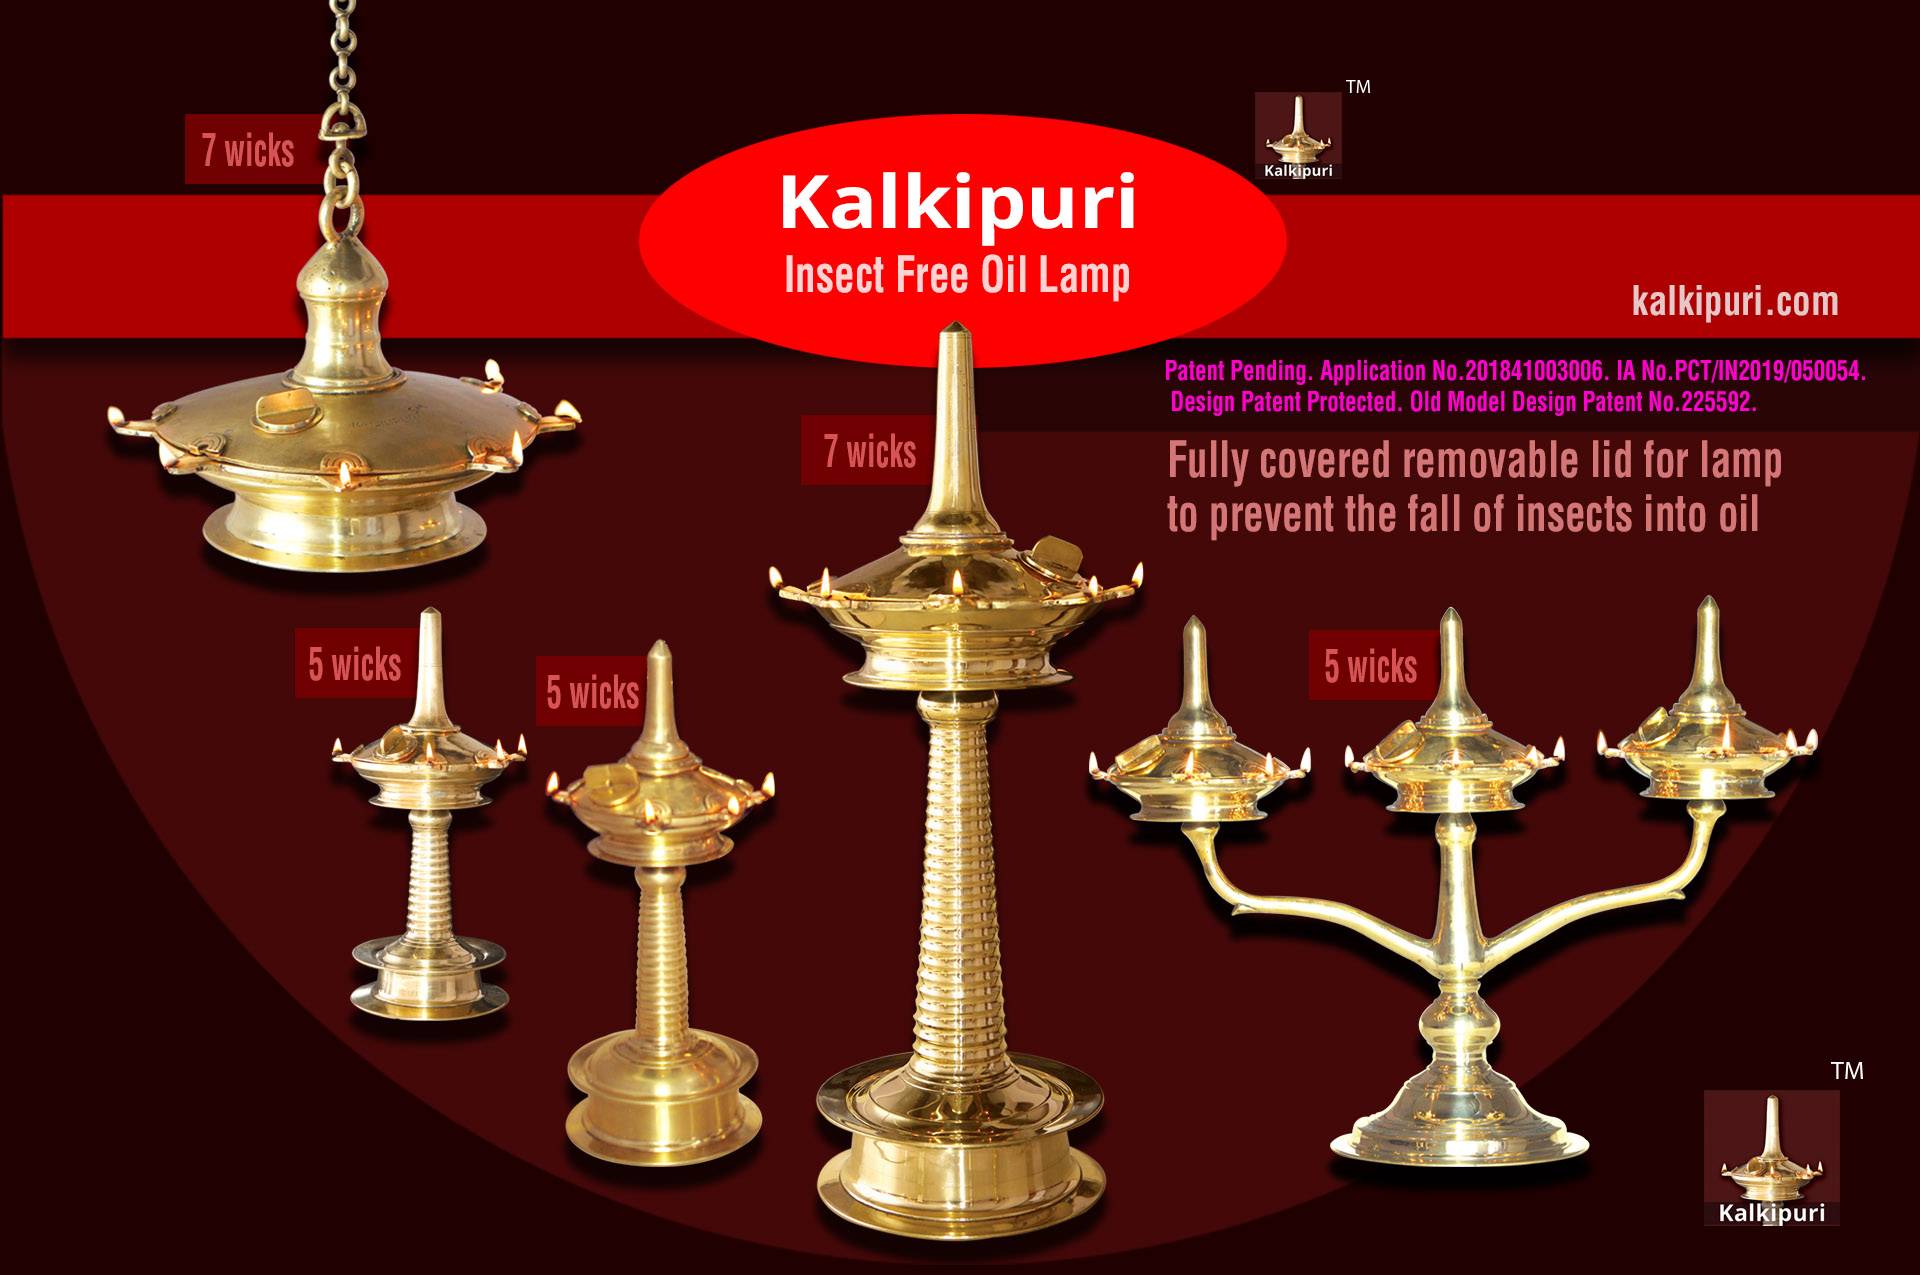 Kalkipuri Insect Free Bronze Oil Lamp. Bronze lid with special arrangements for oil Lamp to make it insect free. Patent pending. Design patent No.225592. Newly modified design patent protected. Inventor: Kalki, Kalkipuri, Edavannappara, Malappuram-673645, Kerala, India. kalkipuri.com.